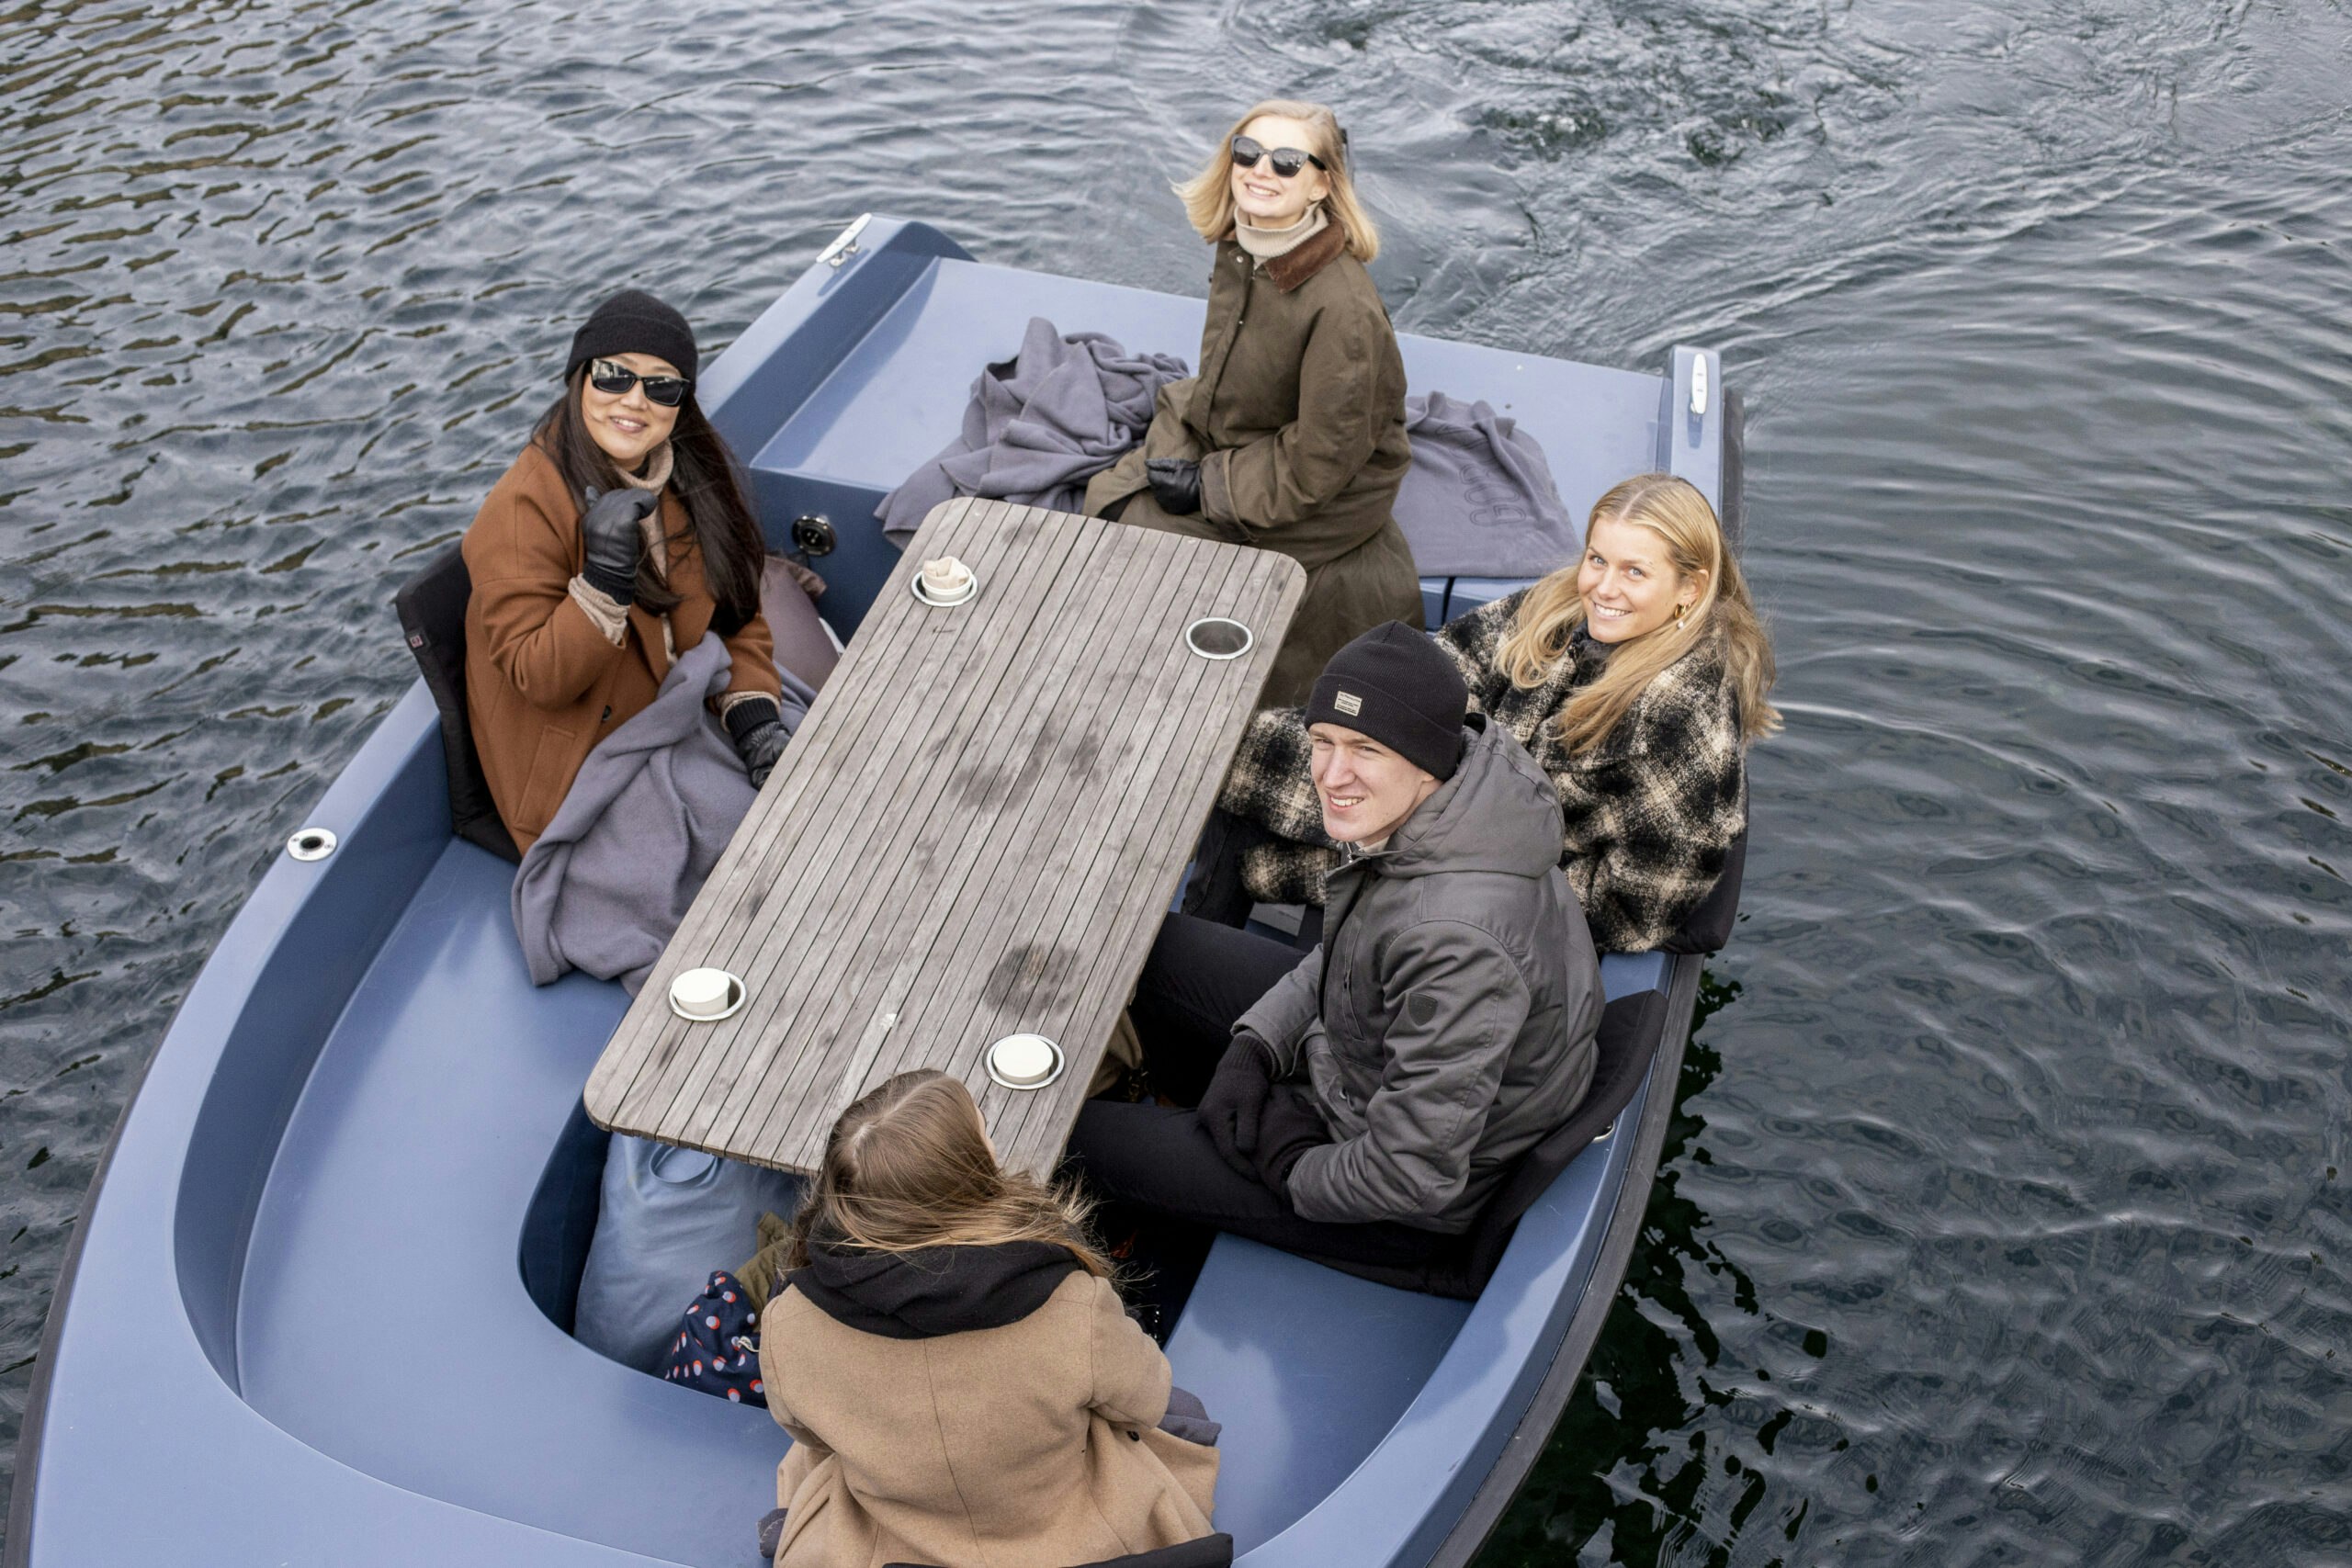 People sitting around picnic table in a GoBoat